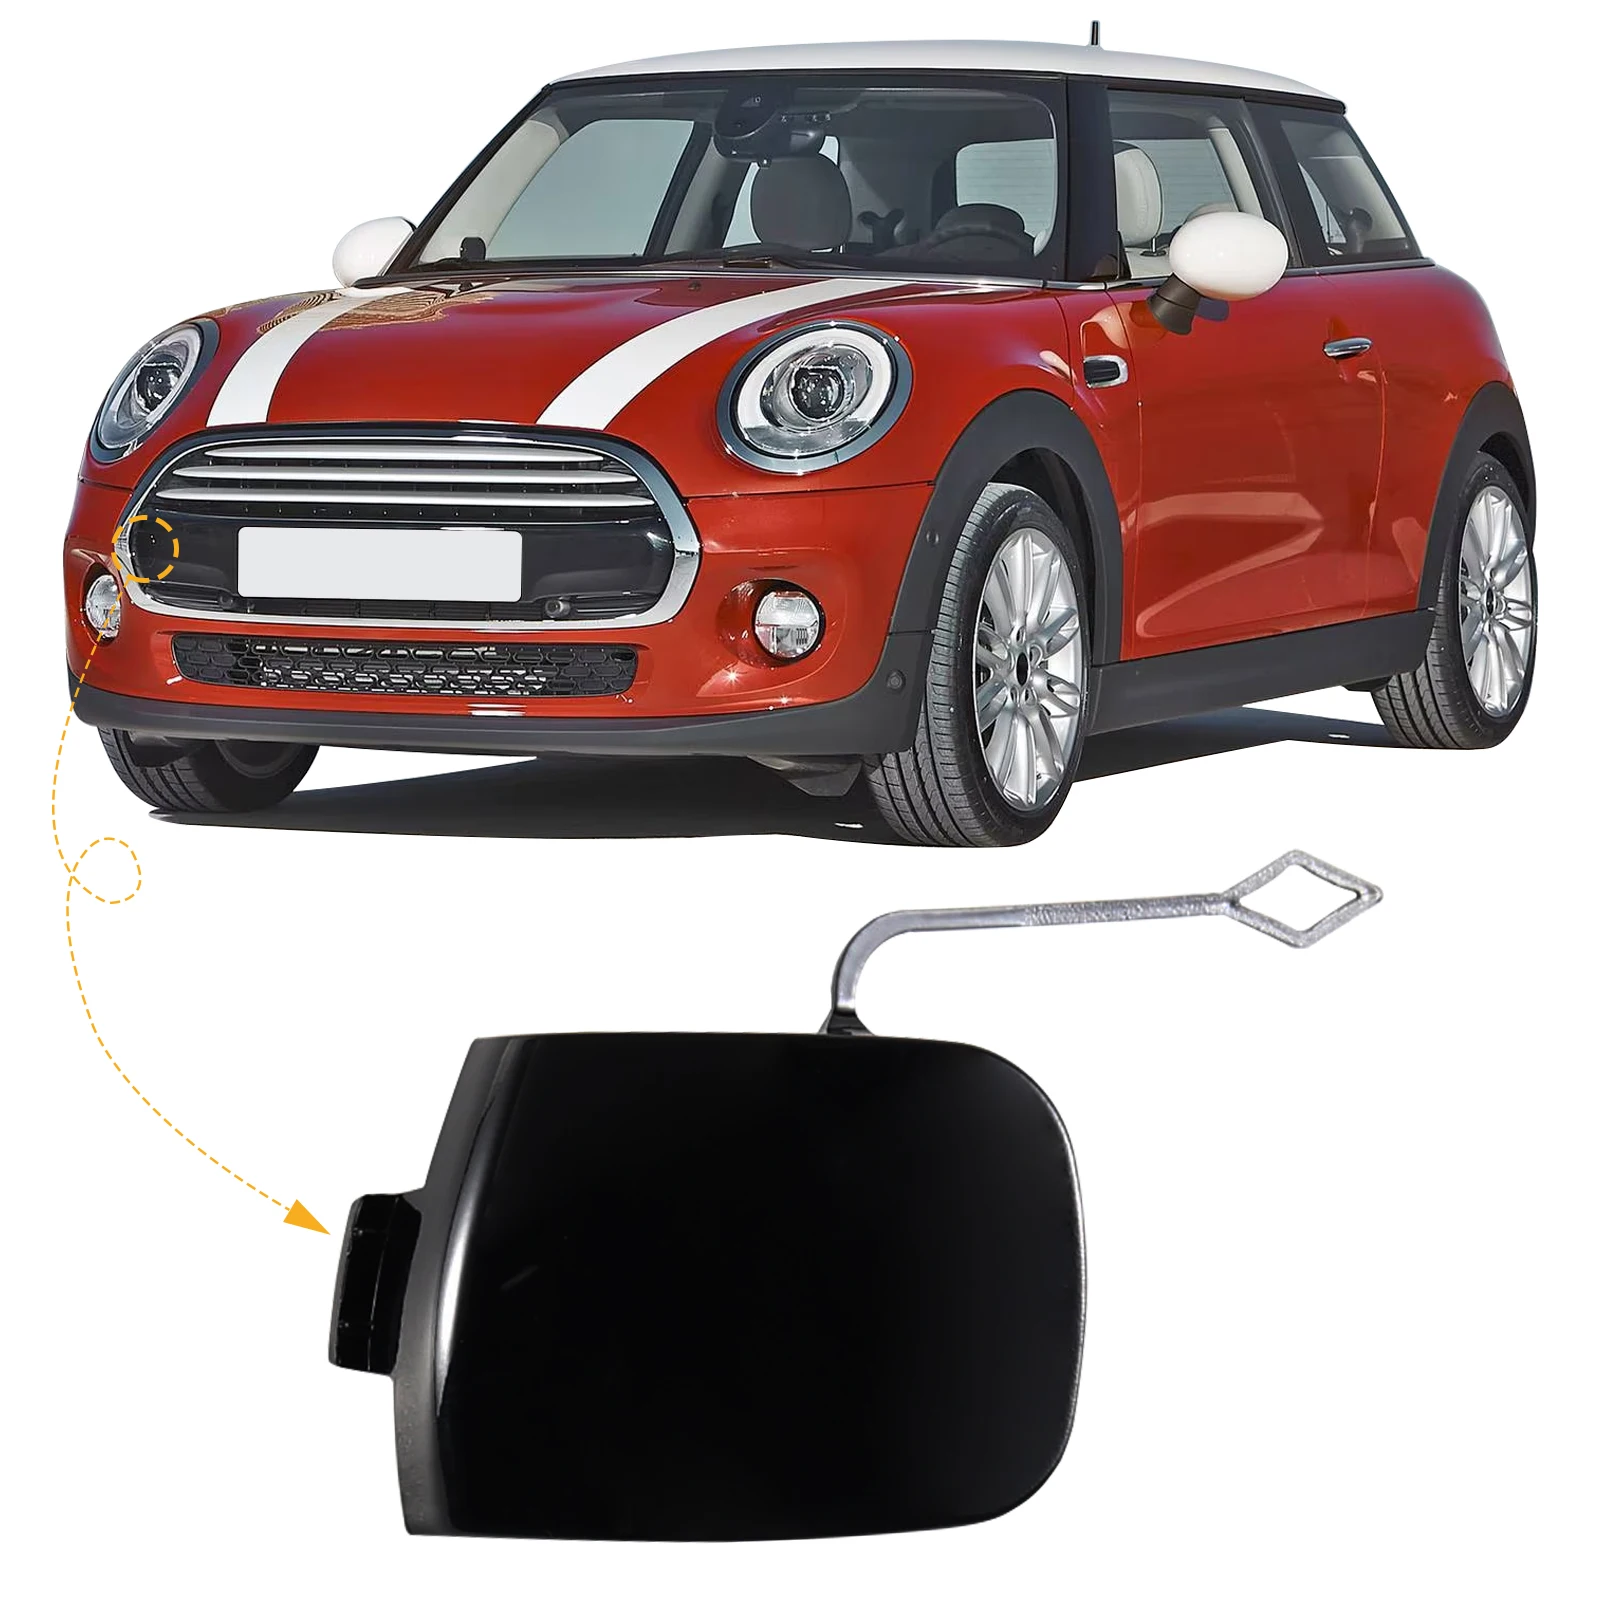 Front Bumper Tow Hook Cap Towing Eye Cover For Mini Cooper S F55 F56 F57  Right Side 2016 2017 2018 51117337796 Car Accessories - AliExpress